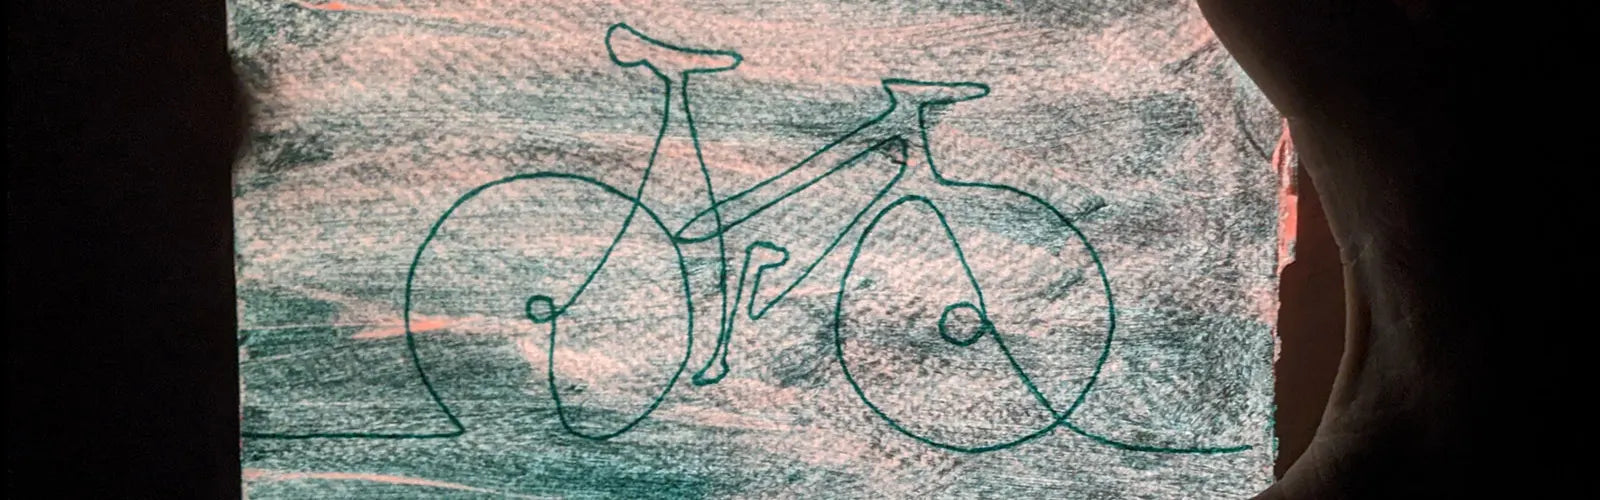 An embroidered stylized bike on fabric